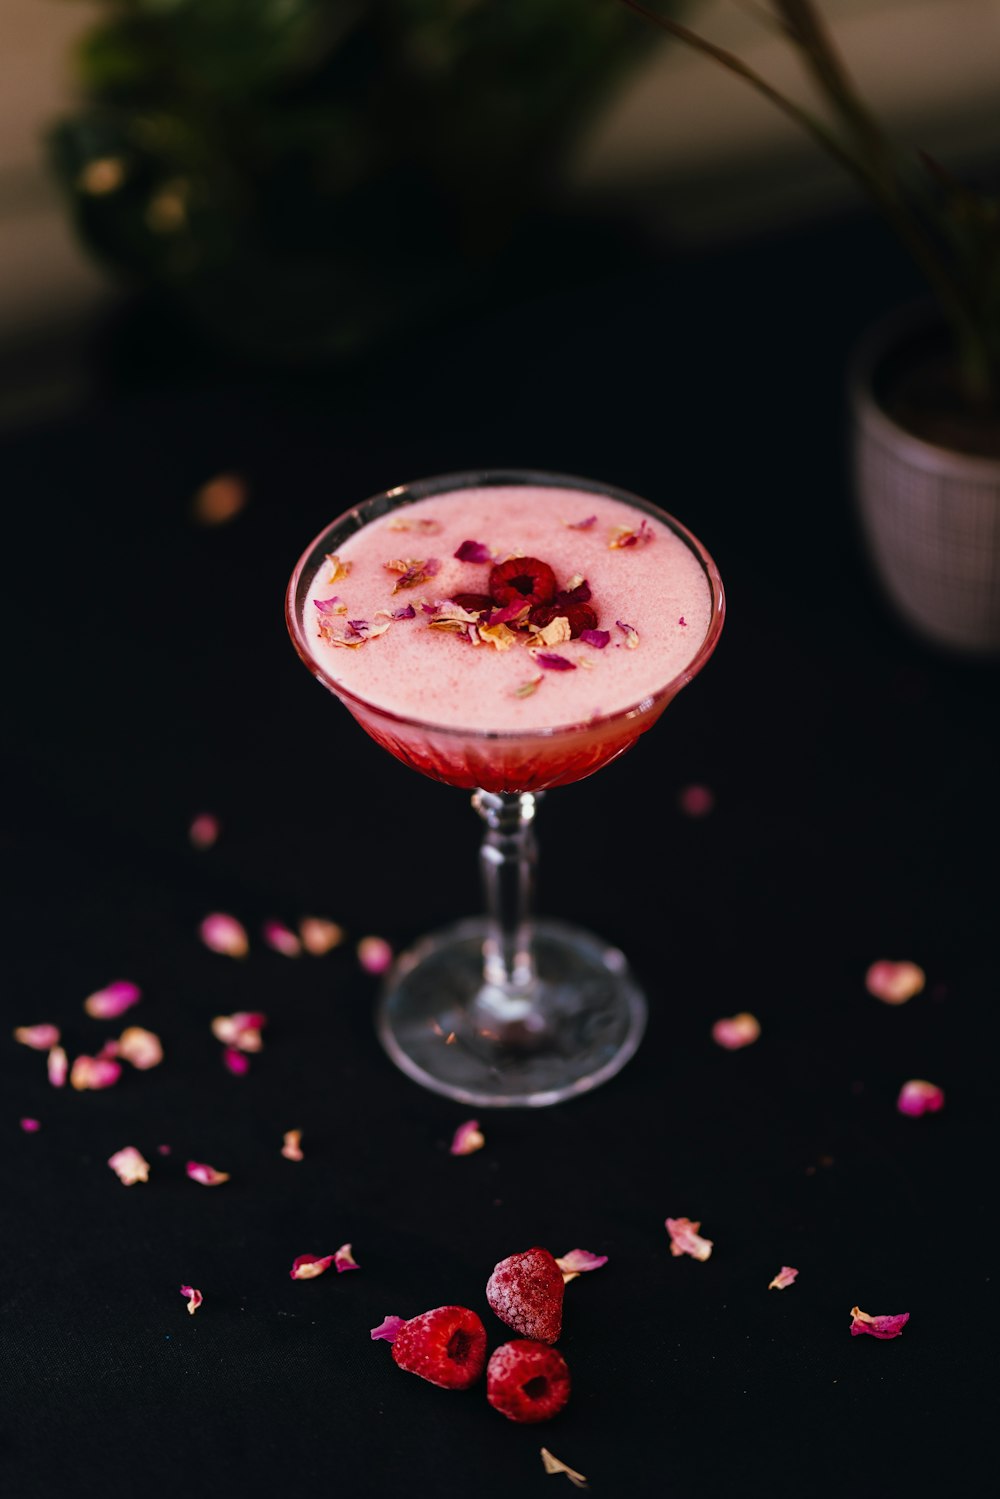 a small glass filled with a drink and garnished with rose petals